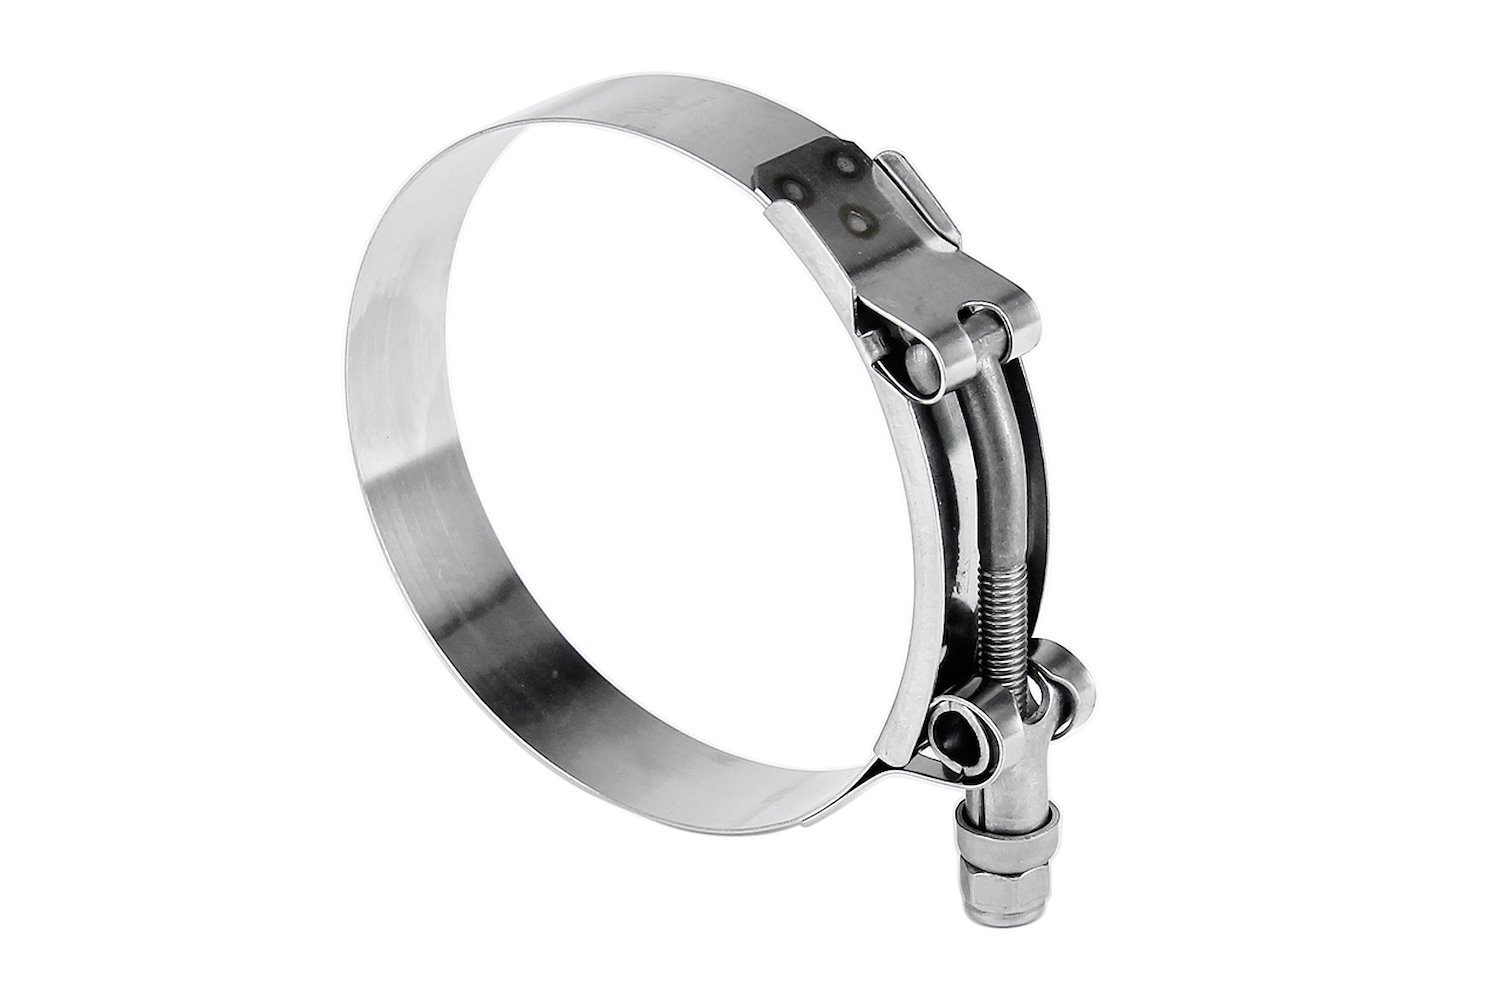 316-SSTC-95-103 100-Percent Marine Grade Stainless Steel T-Bolt Hose Clamp, Size #92, Range: 3.75 in.- 4.06 in.